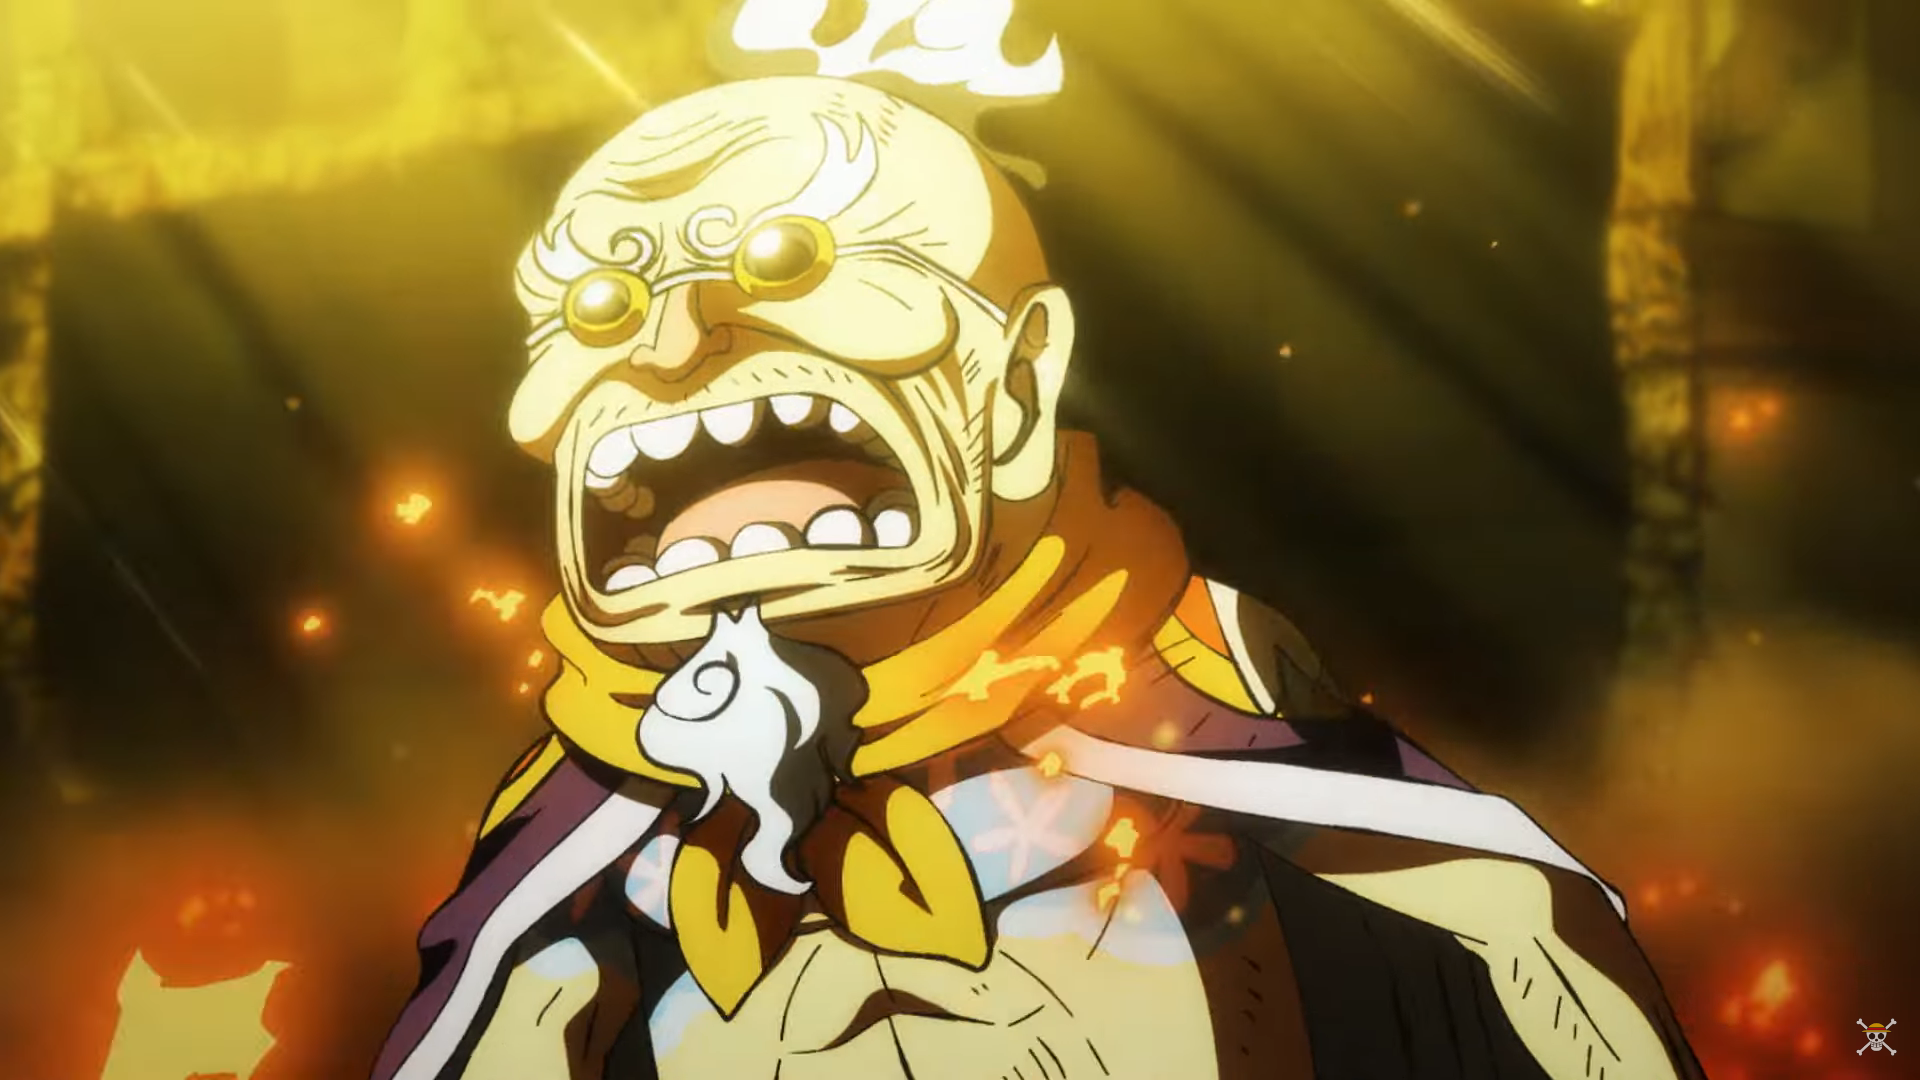 One Piece Episode 1075: Explosive manga spoilers and release date unveiled  - The Economic Times